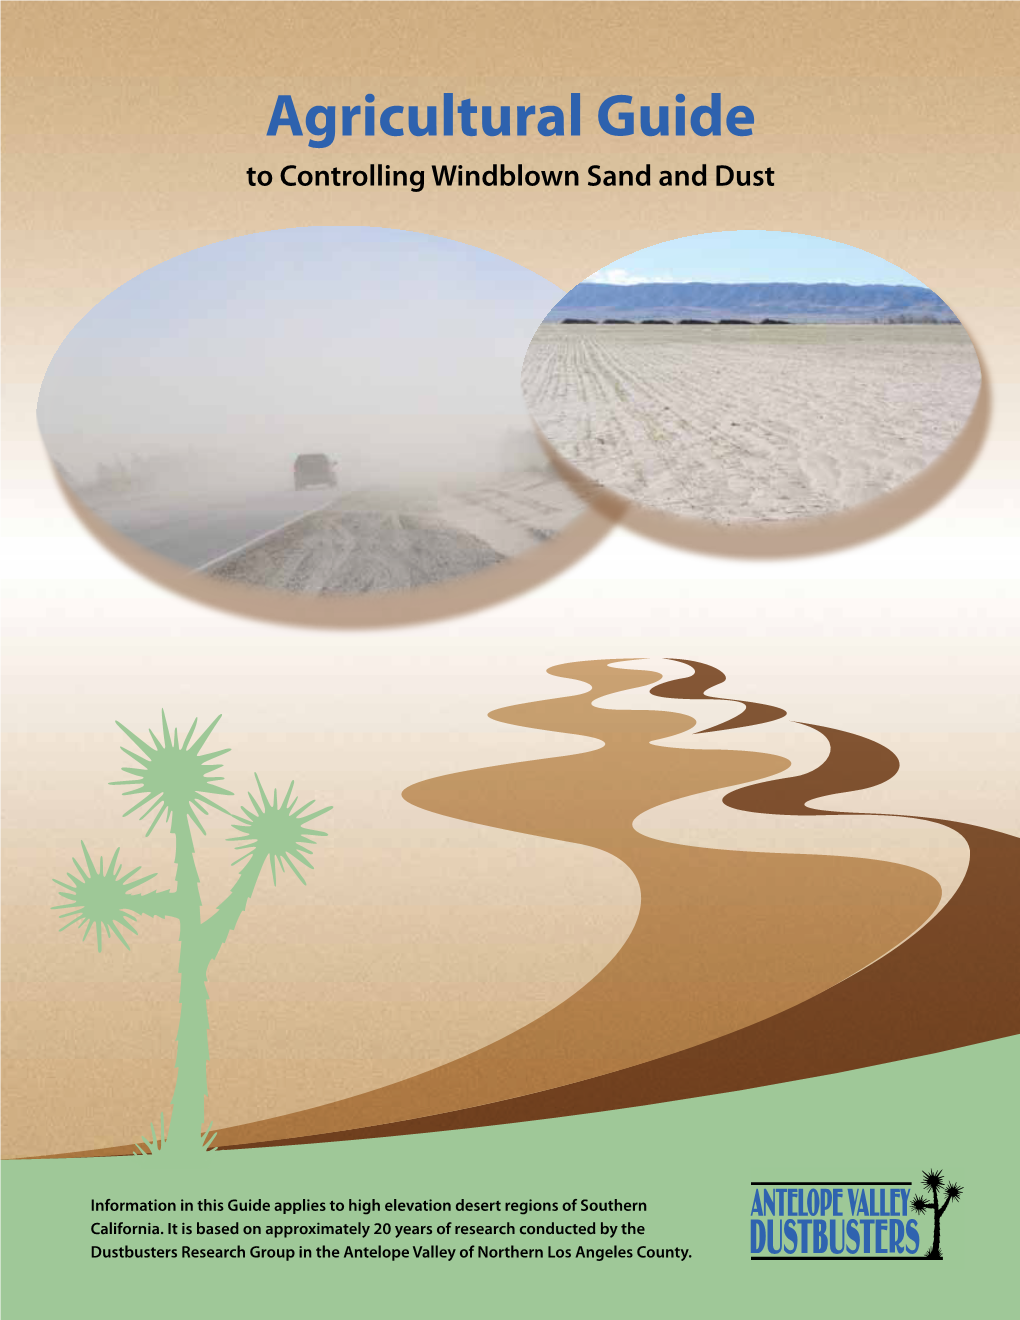 Agricultural Guide to Controlling Windblown Sand and Dust